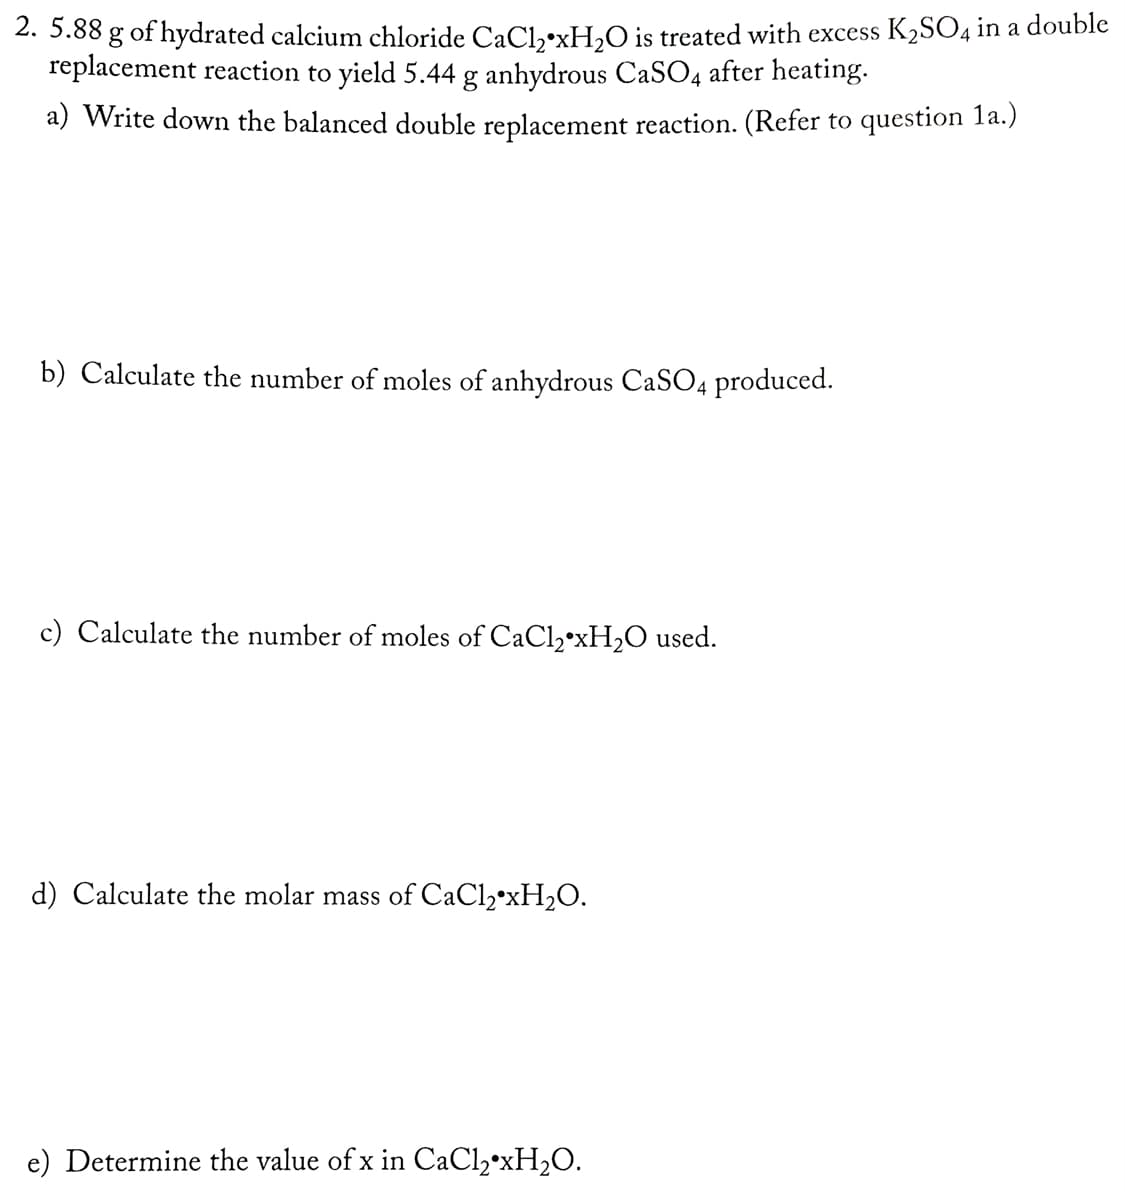 2. 5.88 g of hydrated calcium chloride CaCl,•xH,O is treated with excess K2SO4 in a double
replacement reaction to yield 5.44 g anhydrous CaSO4 after heating.
a) Write down the balanced double replacement reaction. (Refer to question 1a.)
b) Calculate the number of moles of anhydrous CaSO4 produced.
c) Calculate the number of moles of CaCl,•XH2O used.
d) Calculate the molar mass of CaCl2•xH2O.
e) Determine the value of x in CaCl,*XH2O.
